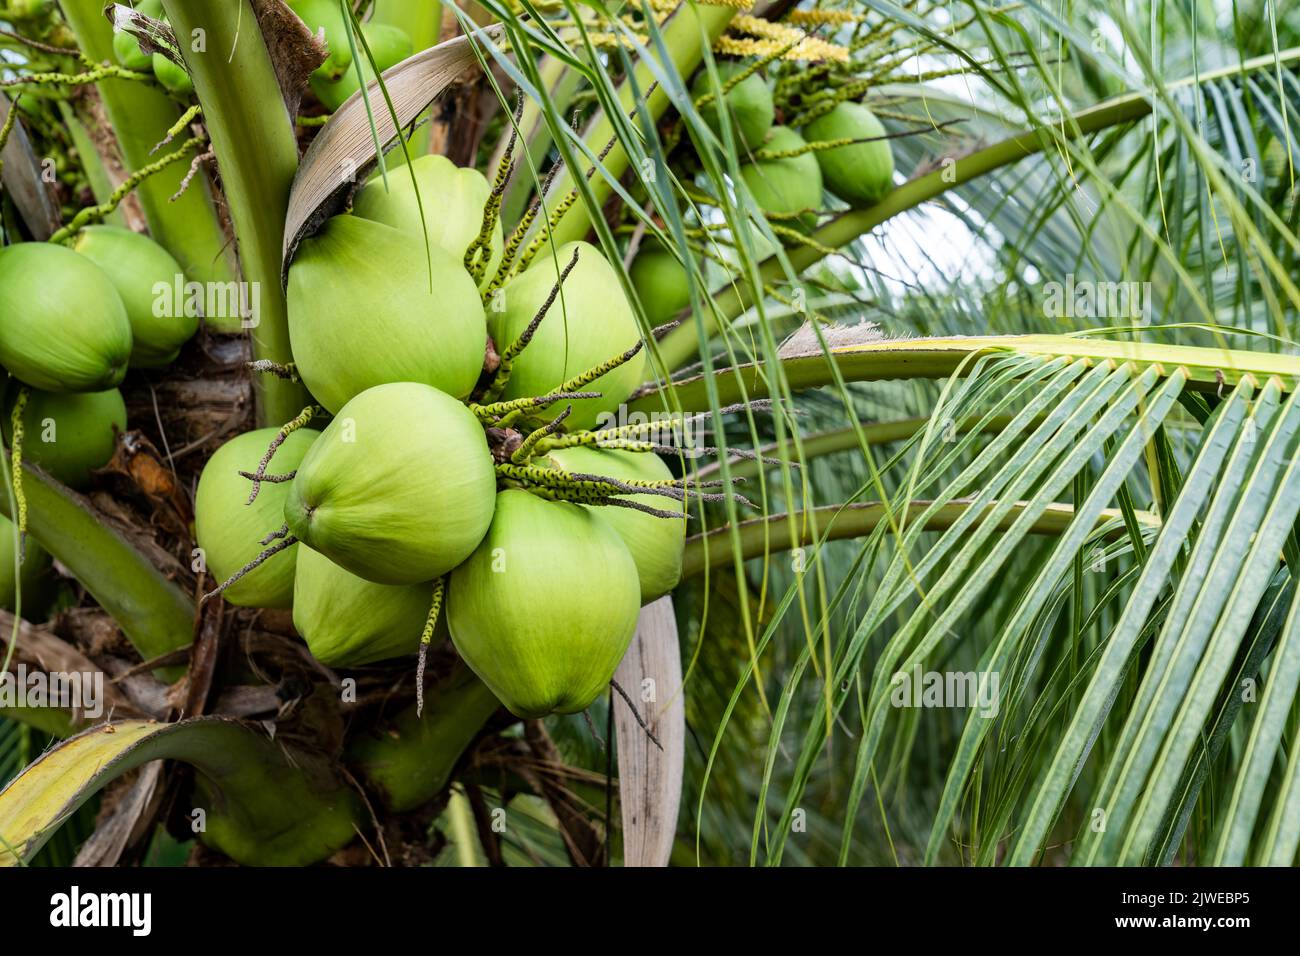 coconut tree, Cocos nucifera is a member of the palm tree family ...